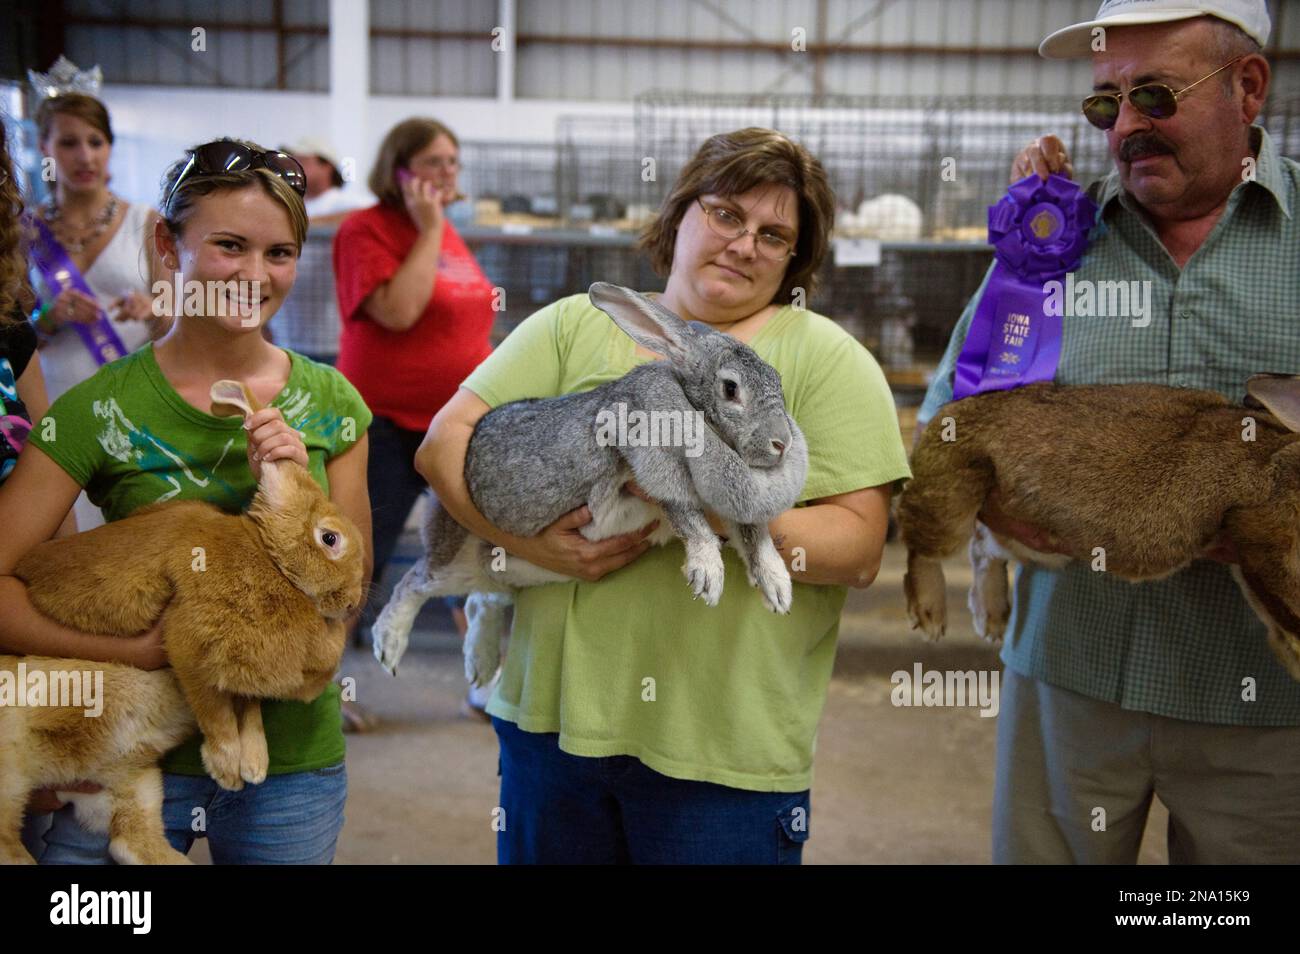 Flemish giant rabbits (Oryctolagus cuniculus flemish) are held by their owners at the Iowa State Fair; Des Moines, Iowa, United States of America Stock Photo